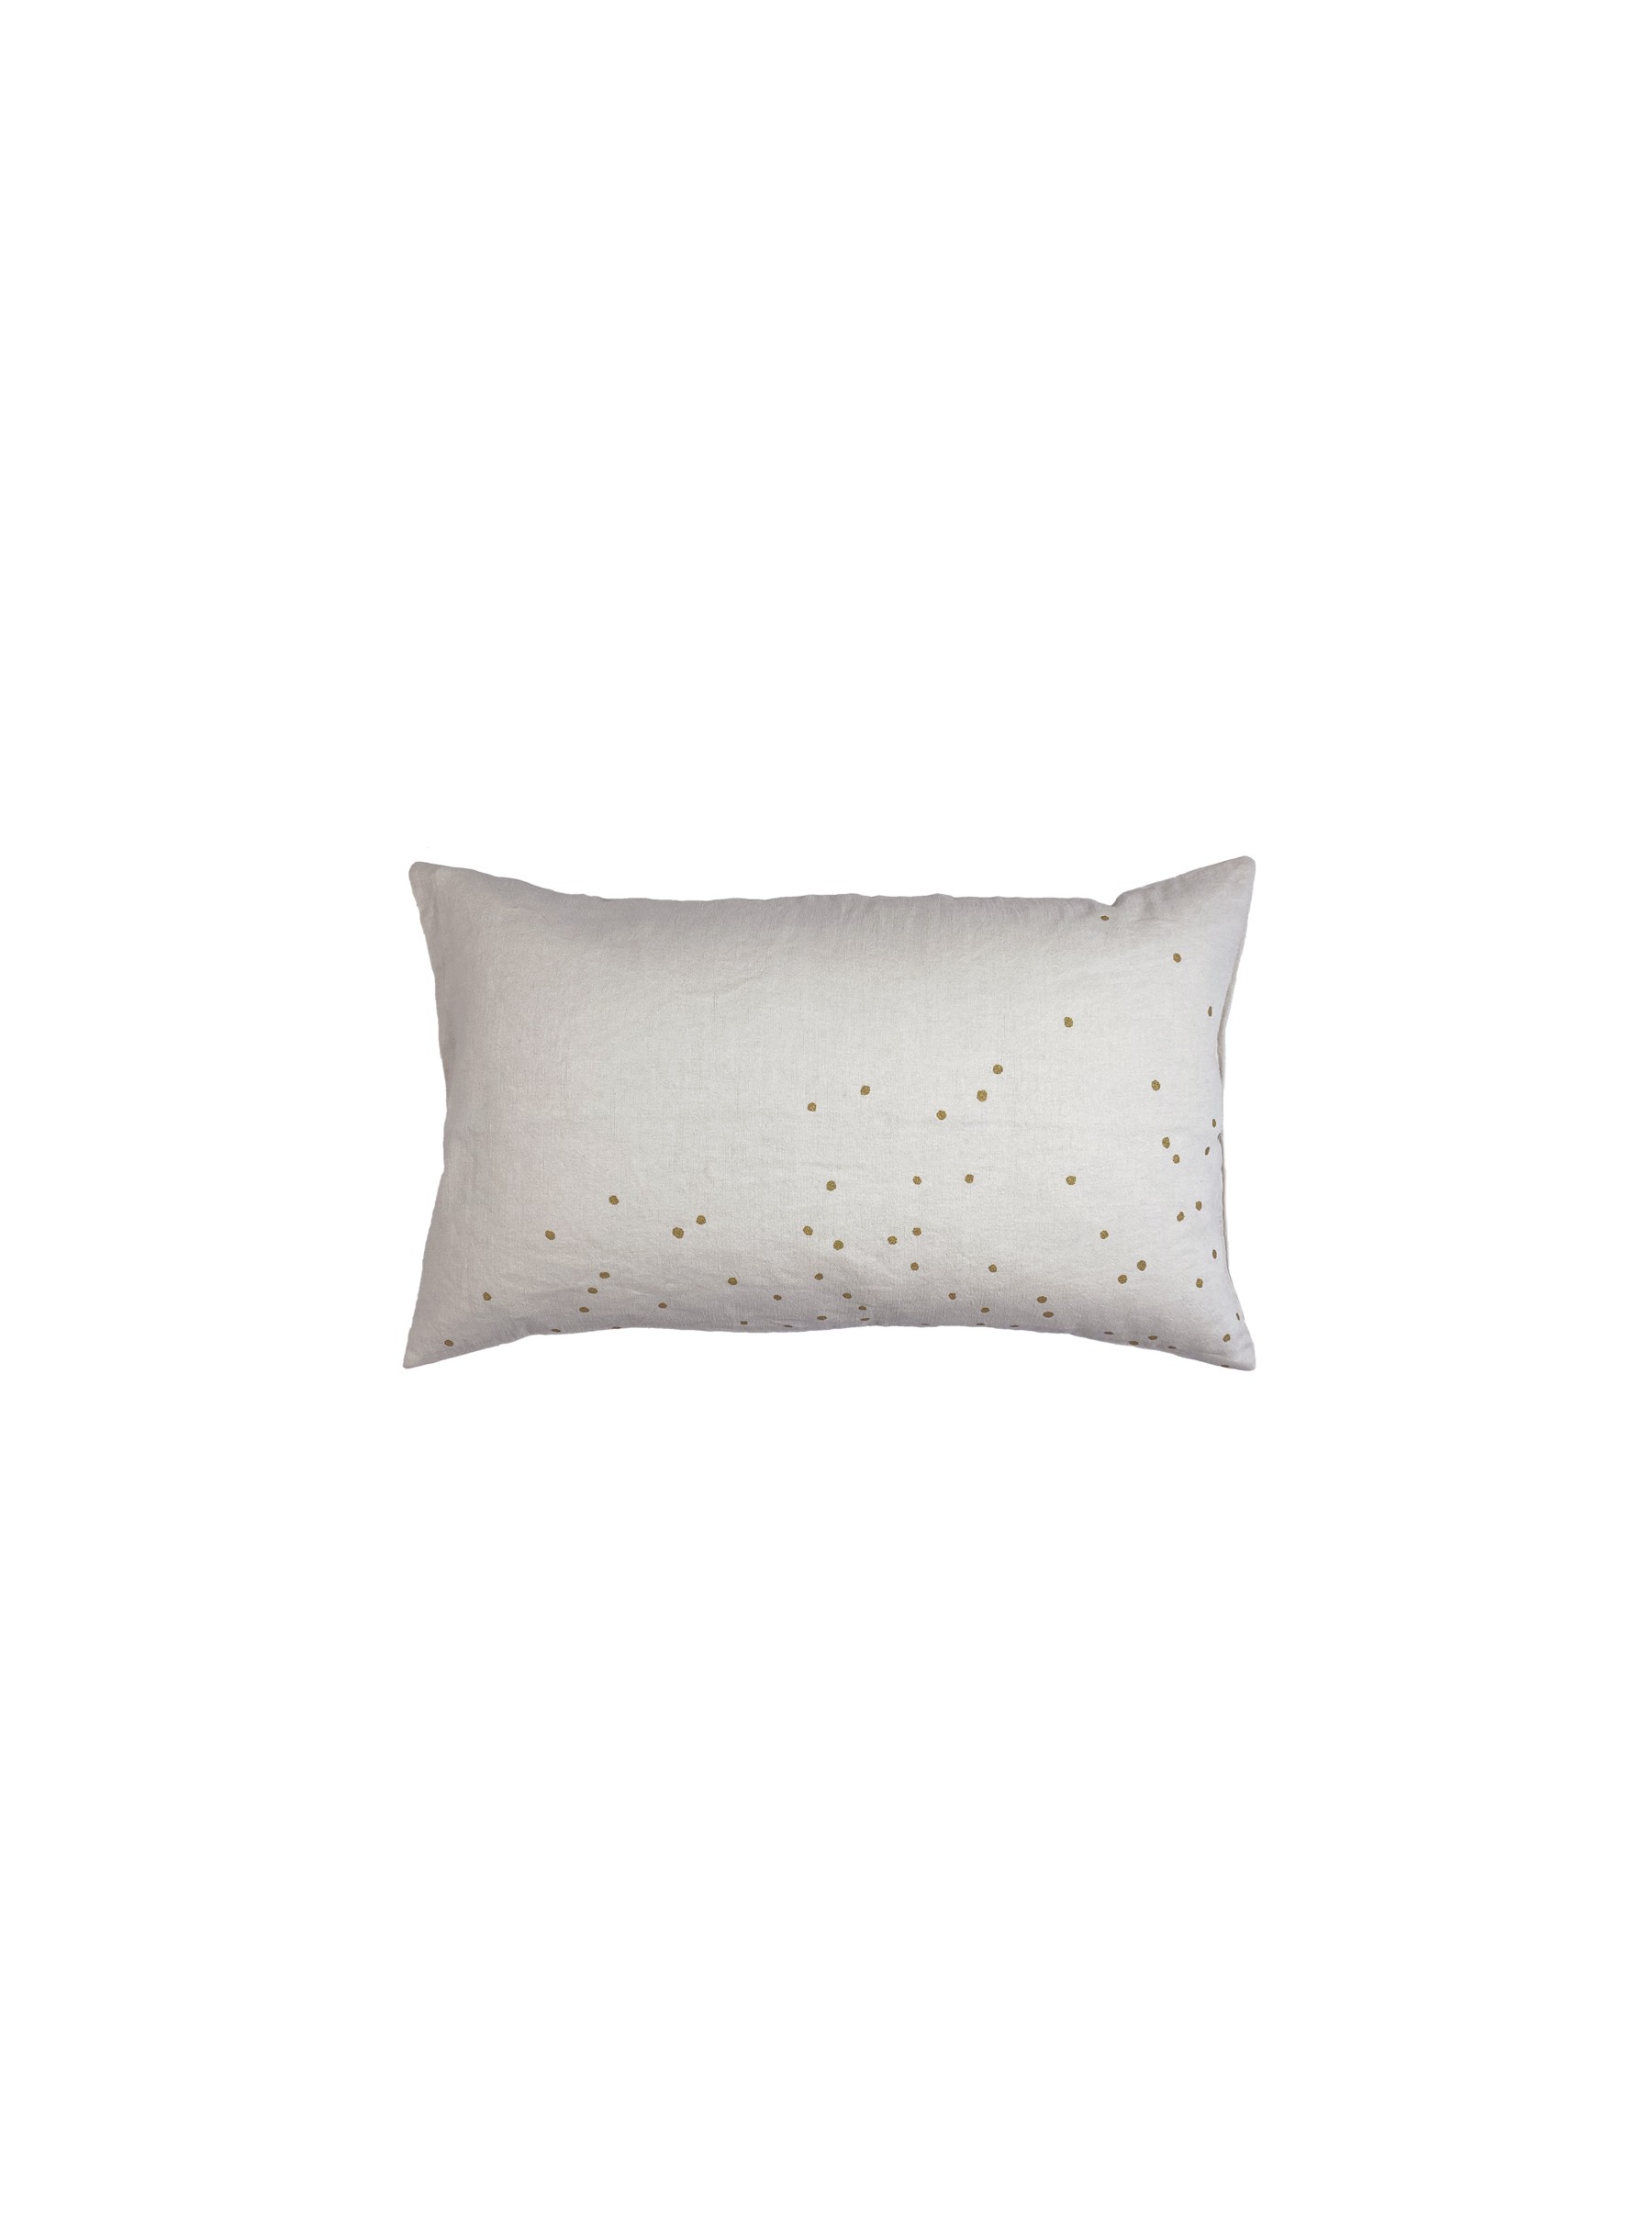 CUSHION COVER LINA CRAIE PLUIE OR 30